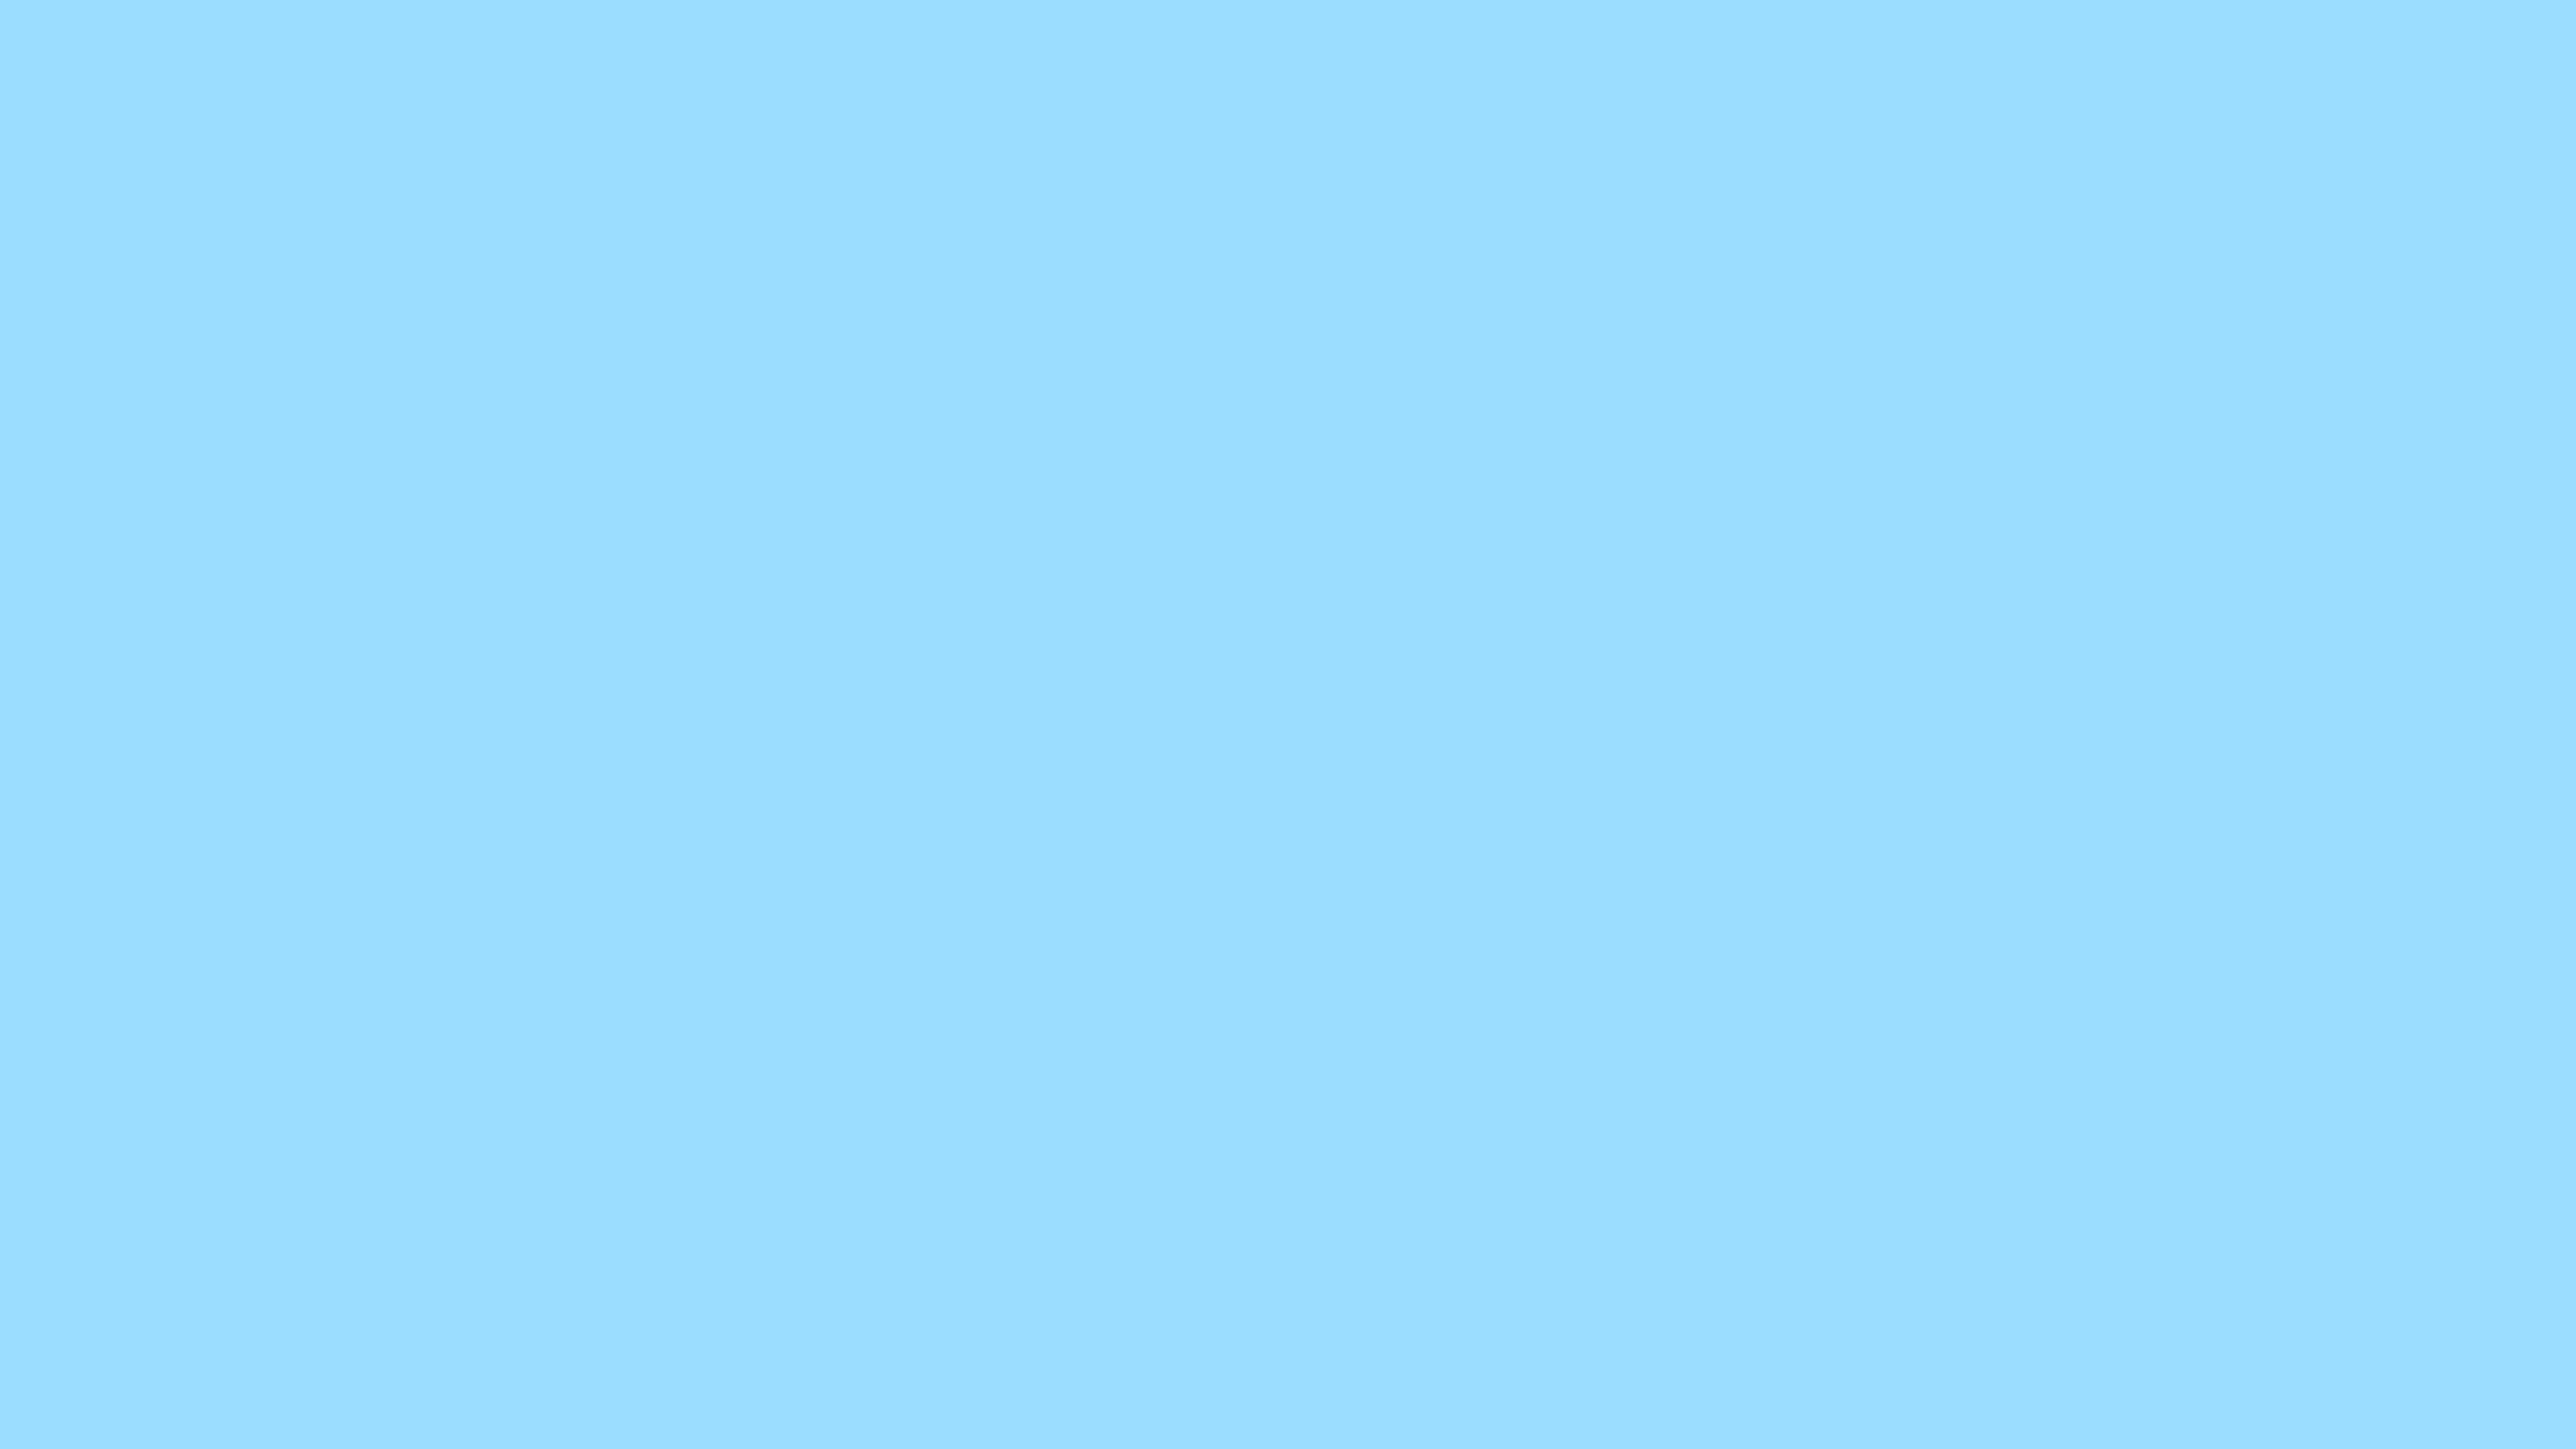 7680x4320 Columbia Blue Solid Color Background